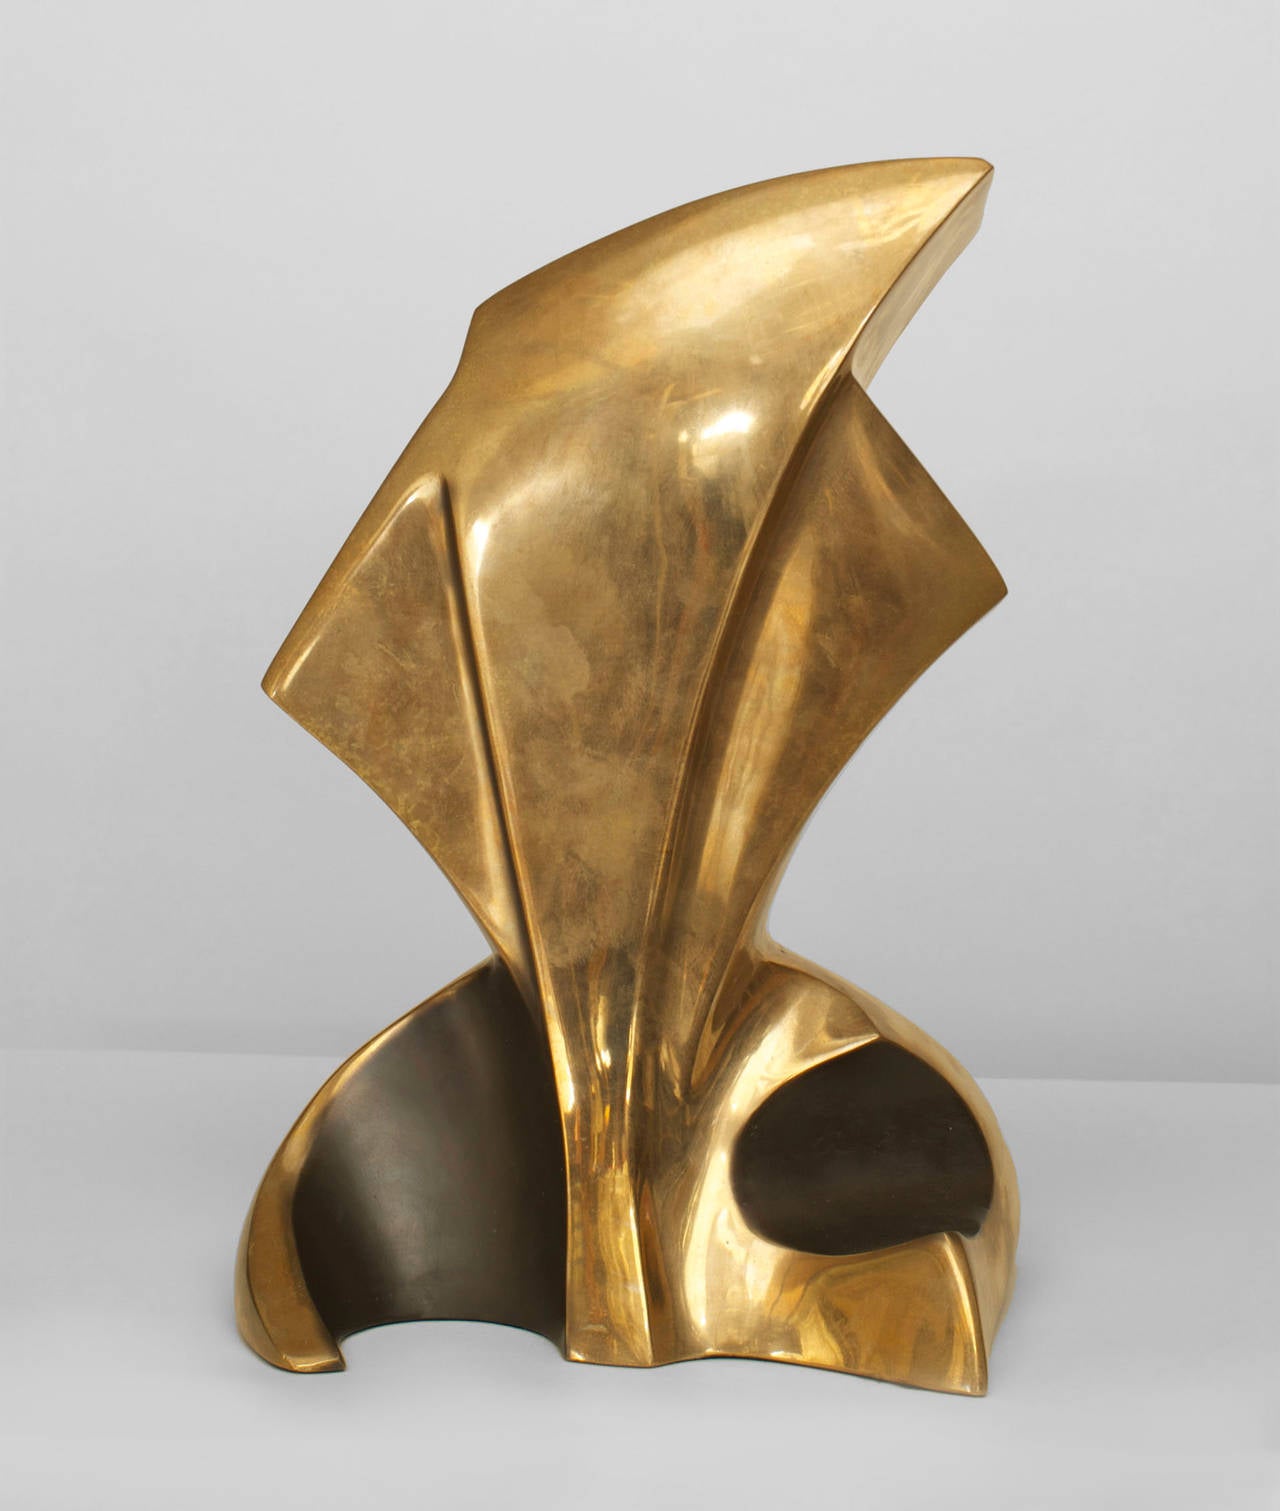 1980s American polished bronze free-form sculpture with four stylized convex black-painted scroll forms at base. The untitled piece is signed and dated by Bob Bennett, 1983.